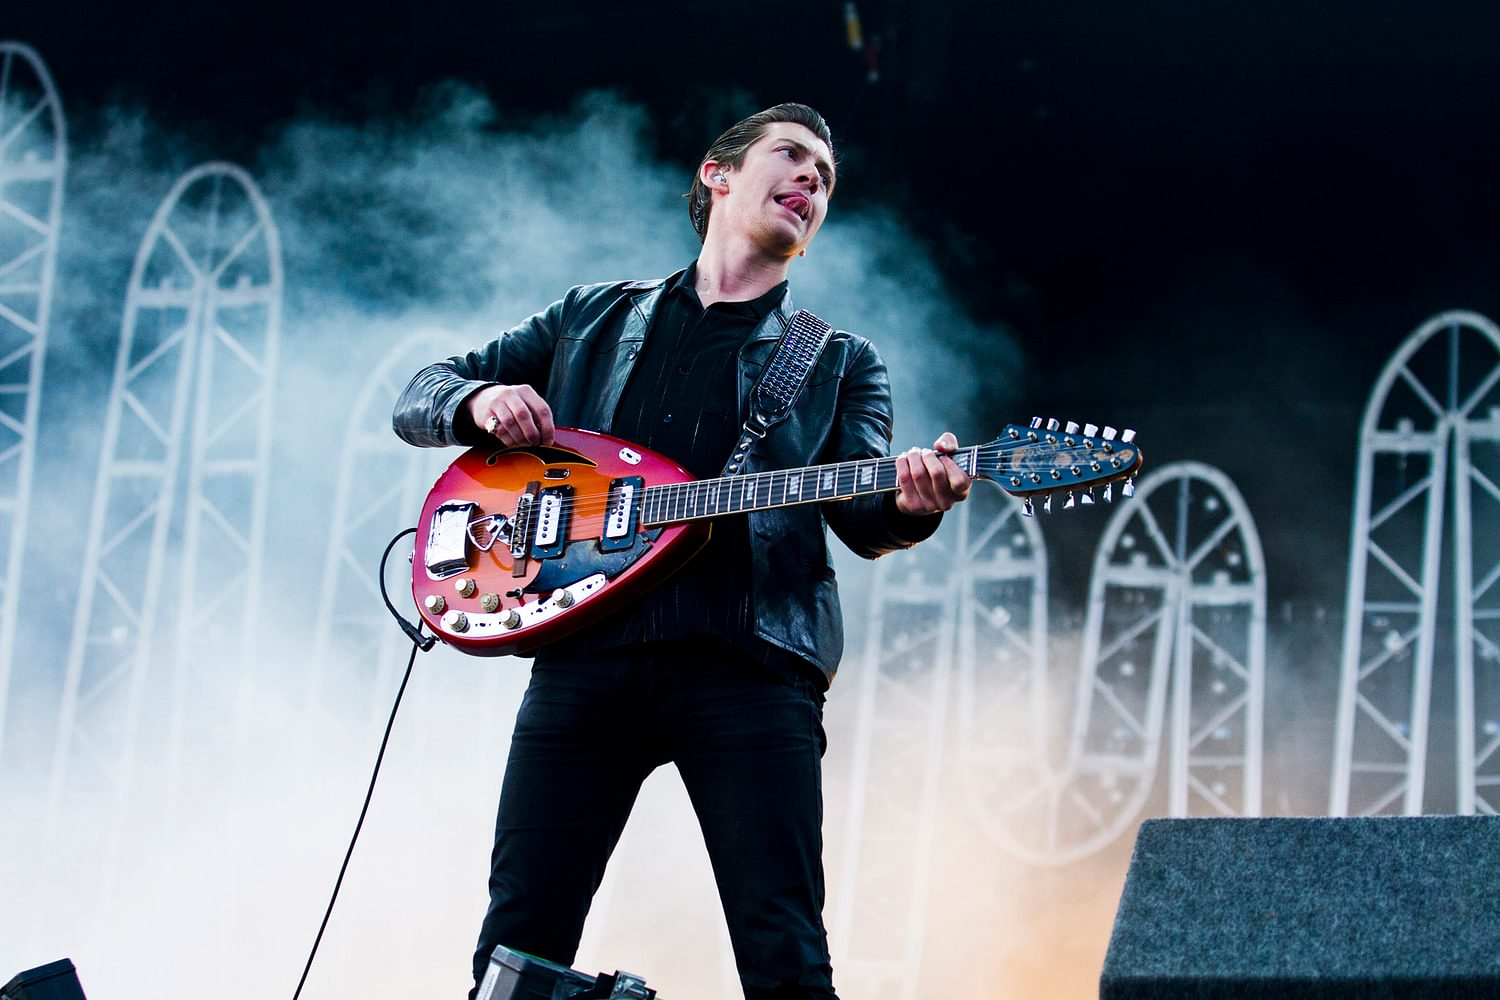 Watch Arctic Monkeys play ‘Tranquility Base Hotel & Casino’ songs live for the first time